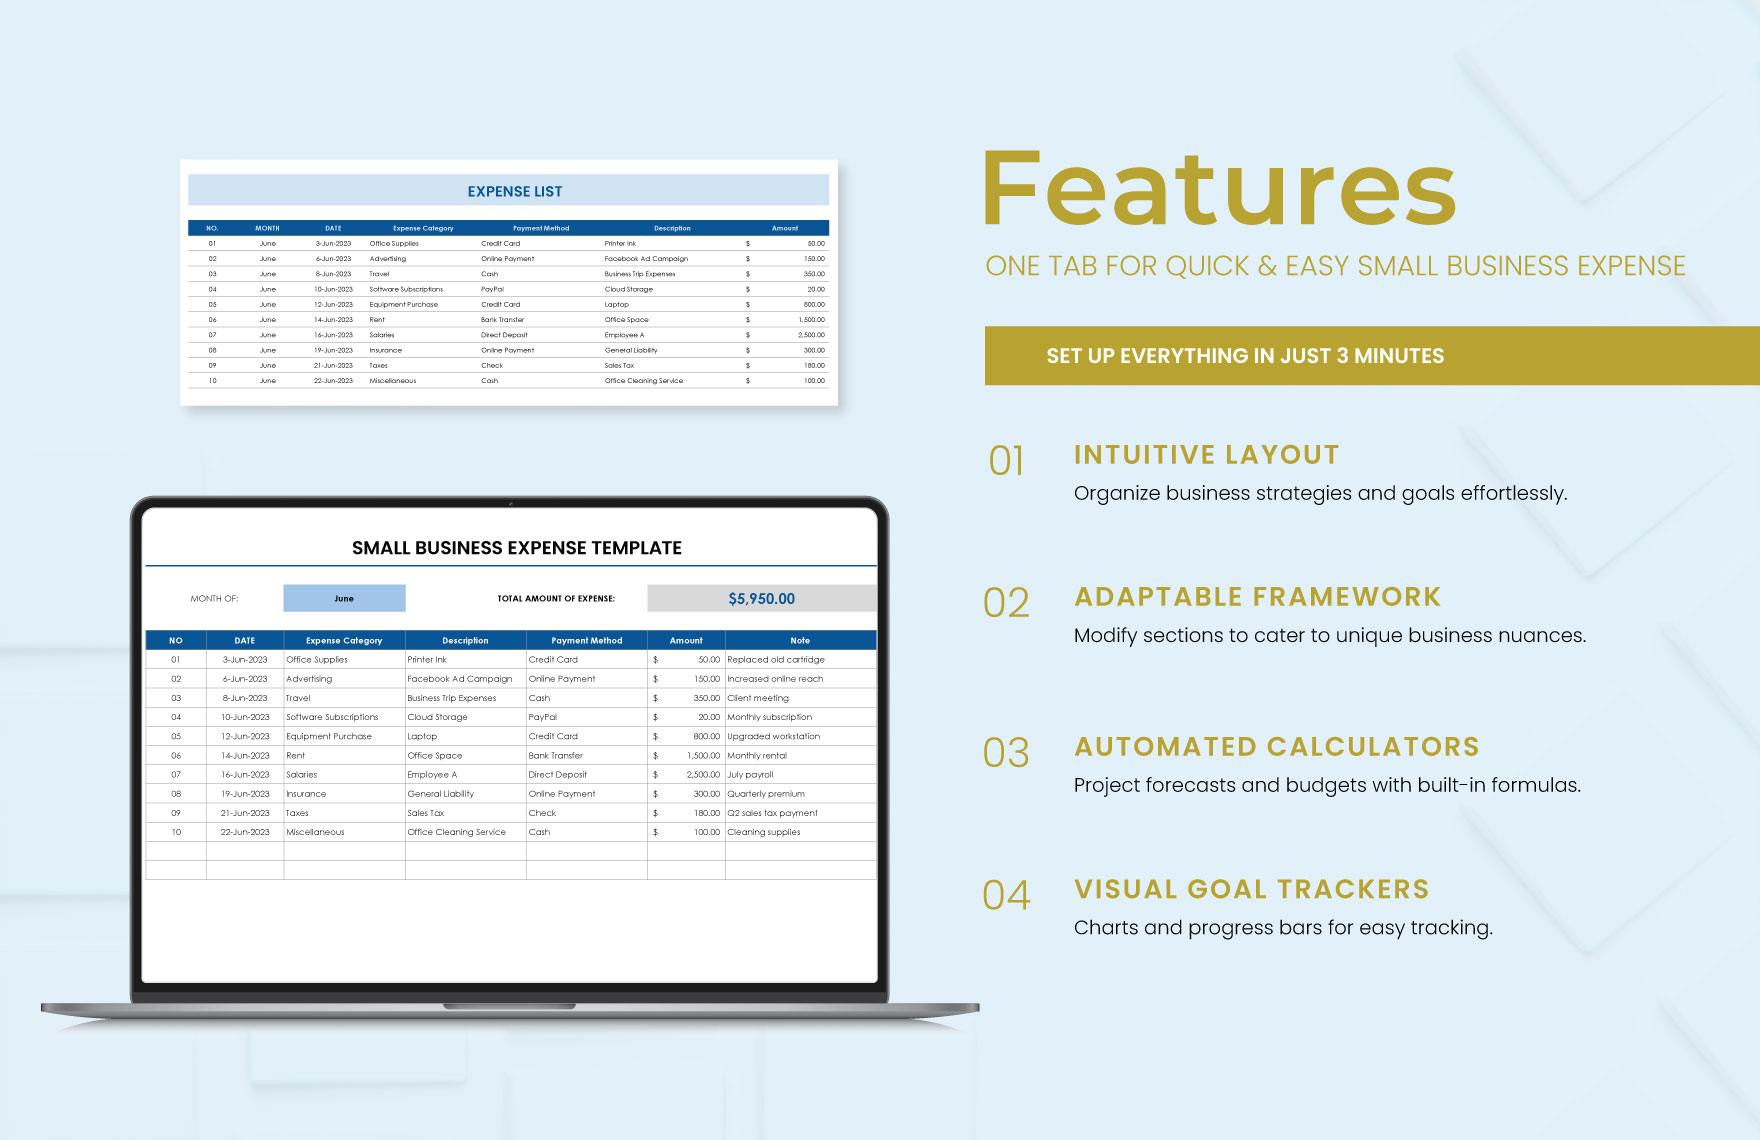 Small Business Expense Template